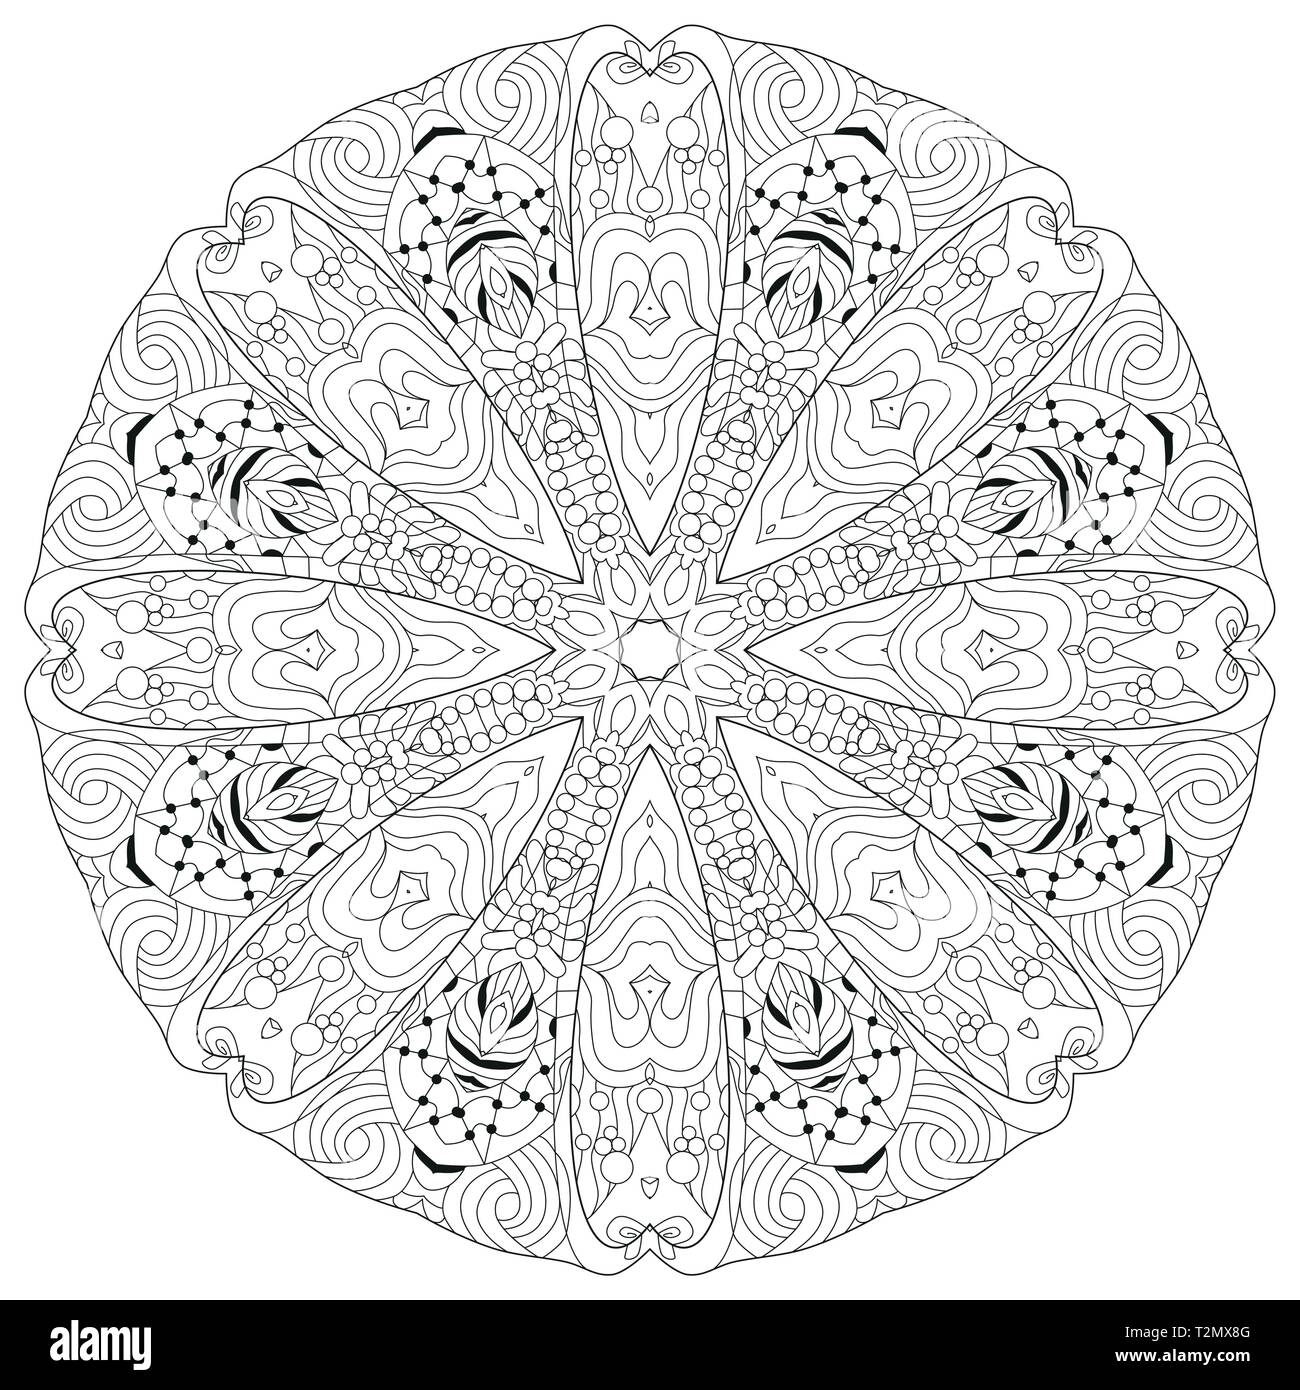 Adult colouring book Black and White Stock Photos & Images - Alamy